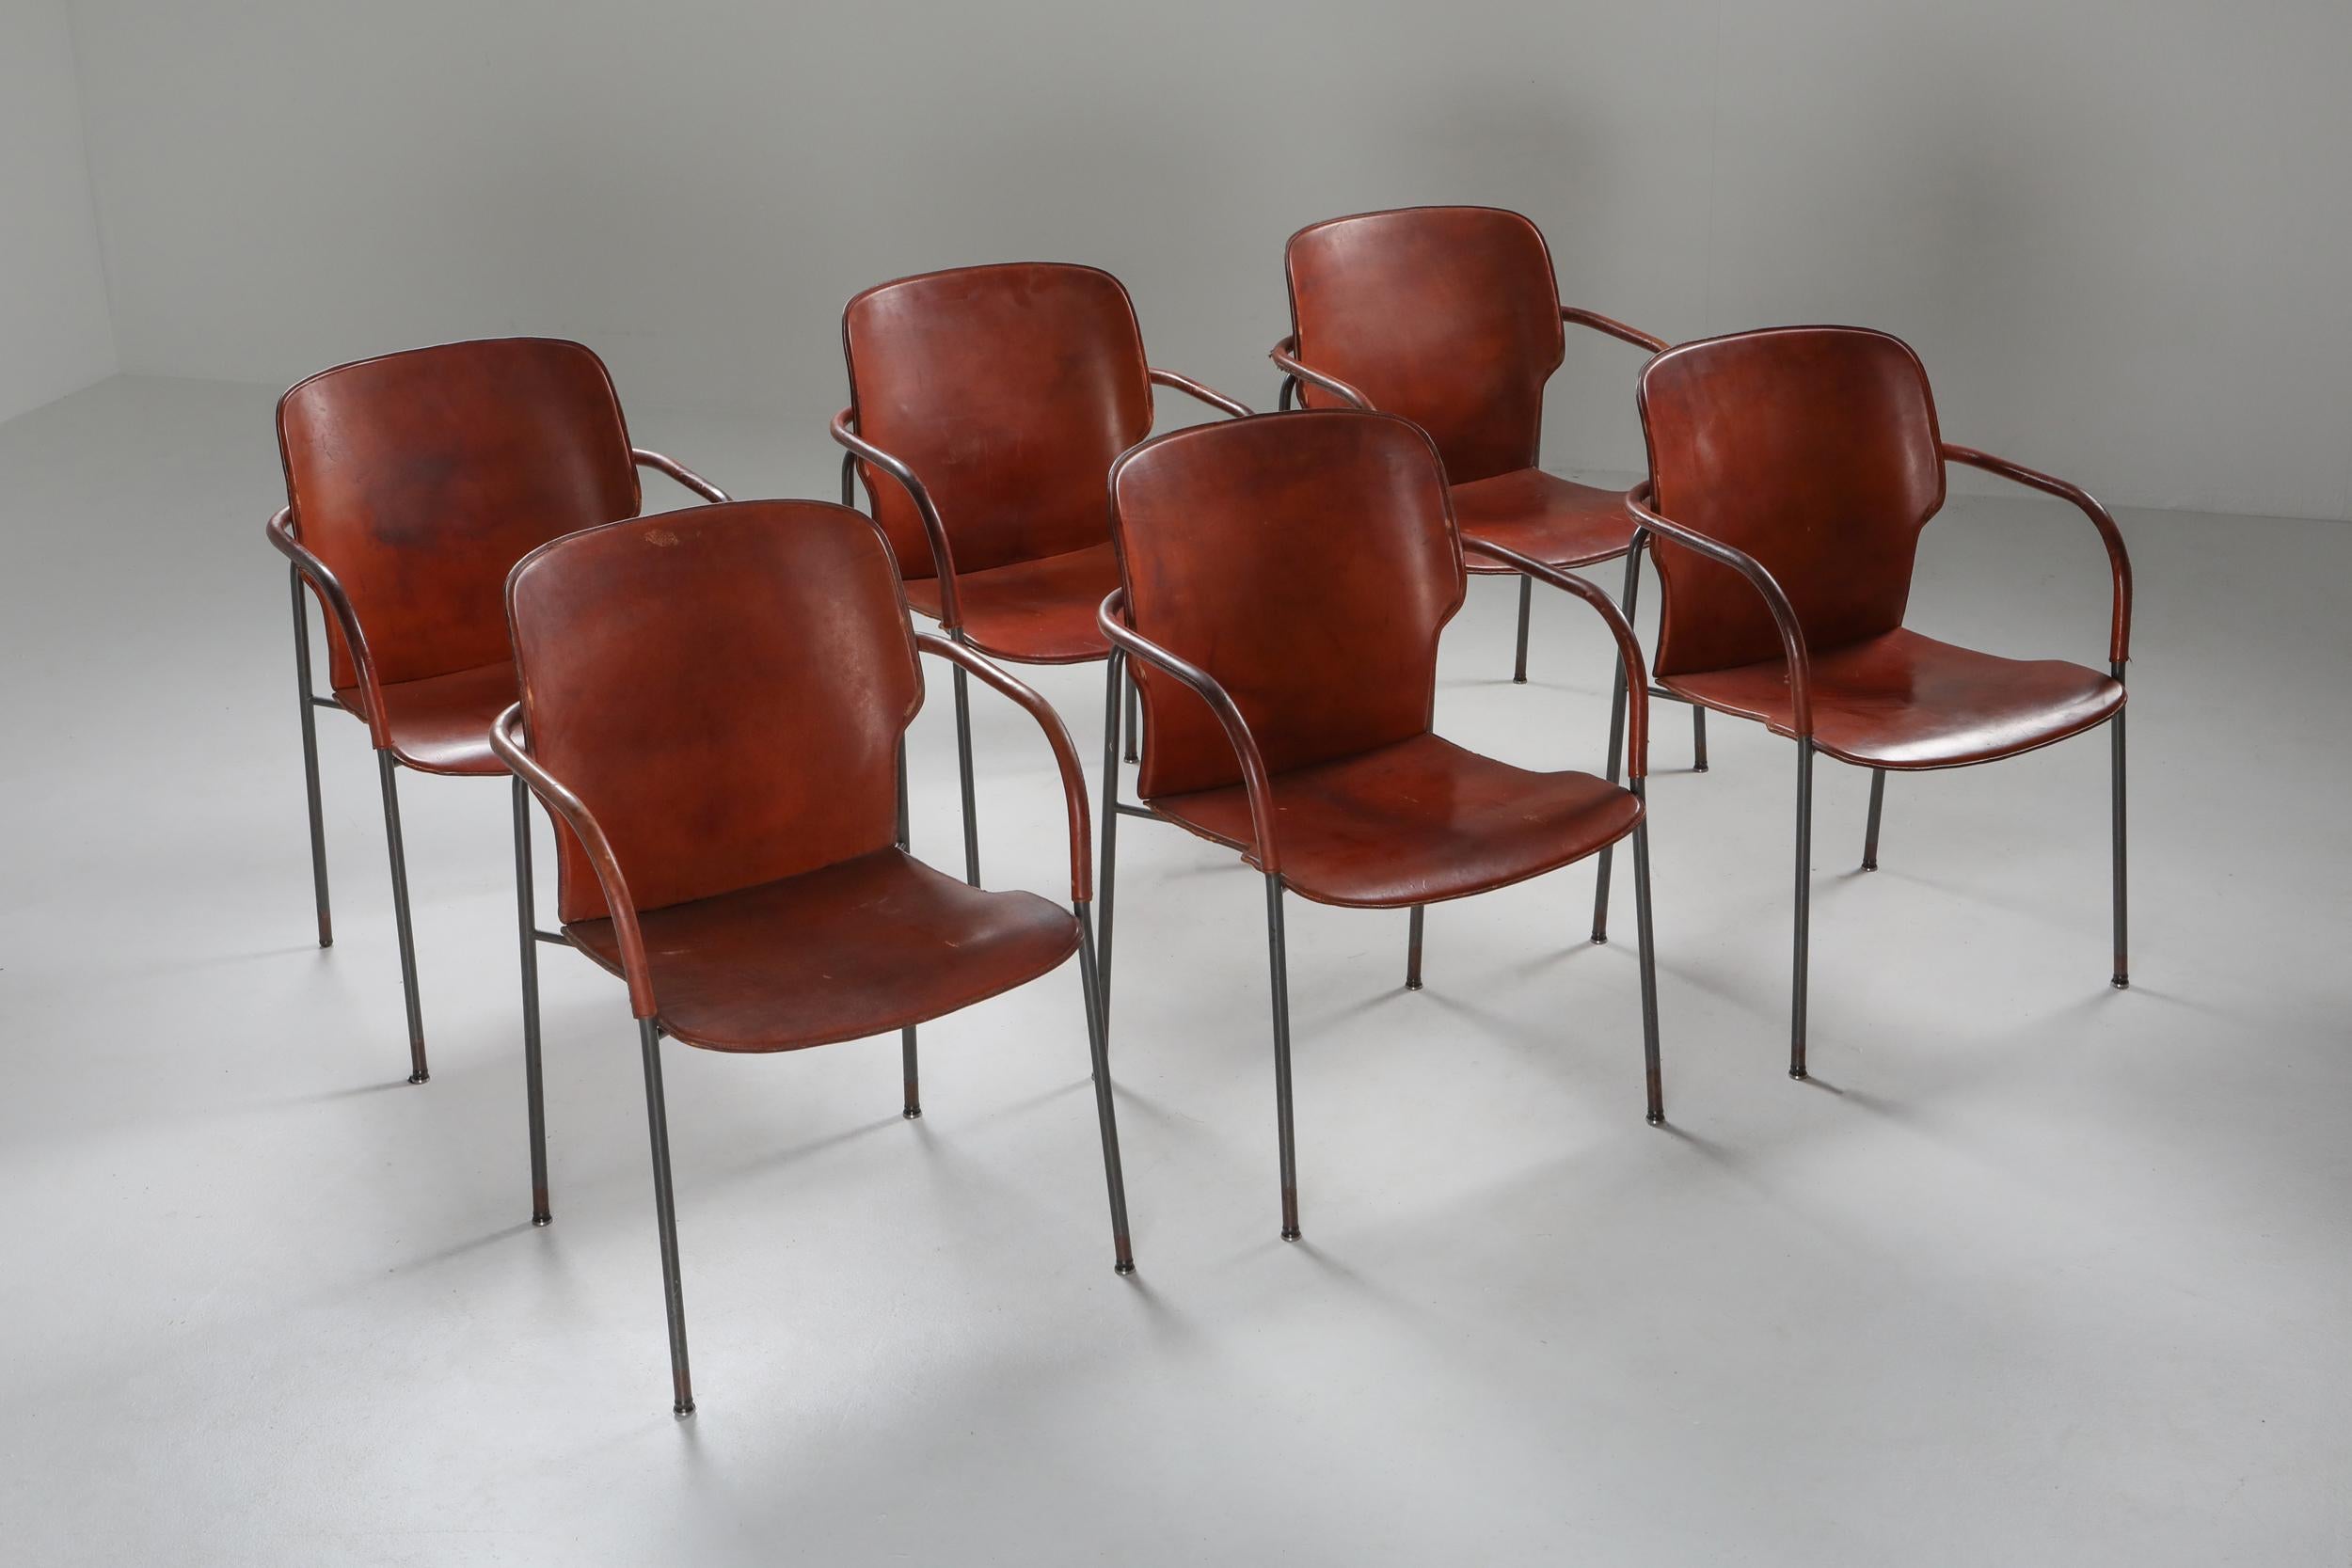 Lalanda chairs, set of 10 dining chairs, Gianfranco Frattini, 
Dark grey lacquered frame and cognac/whiskey patinated leather seating.
Magnificent set in every sense, we offer ten pieces in total, super quality, minimal lines, and fantastic patina